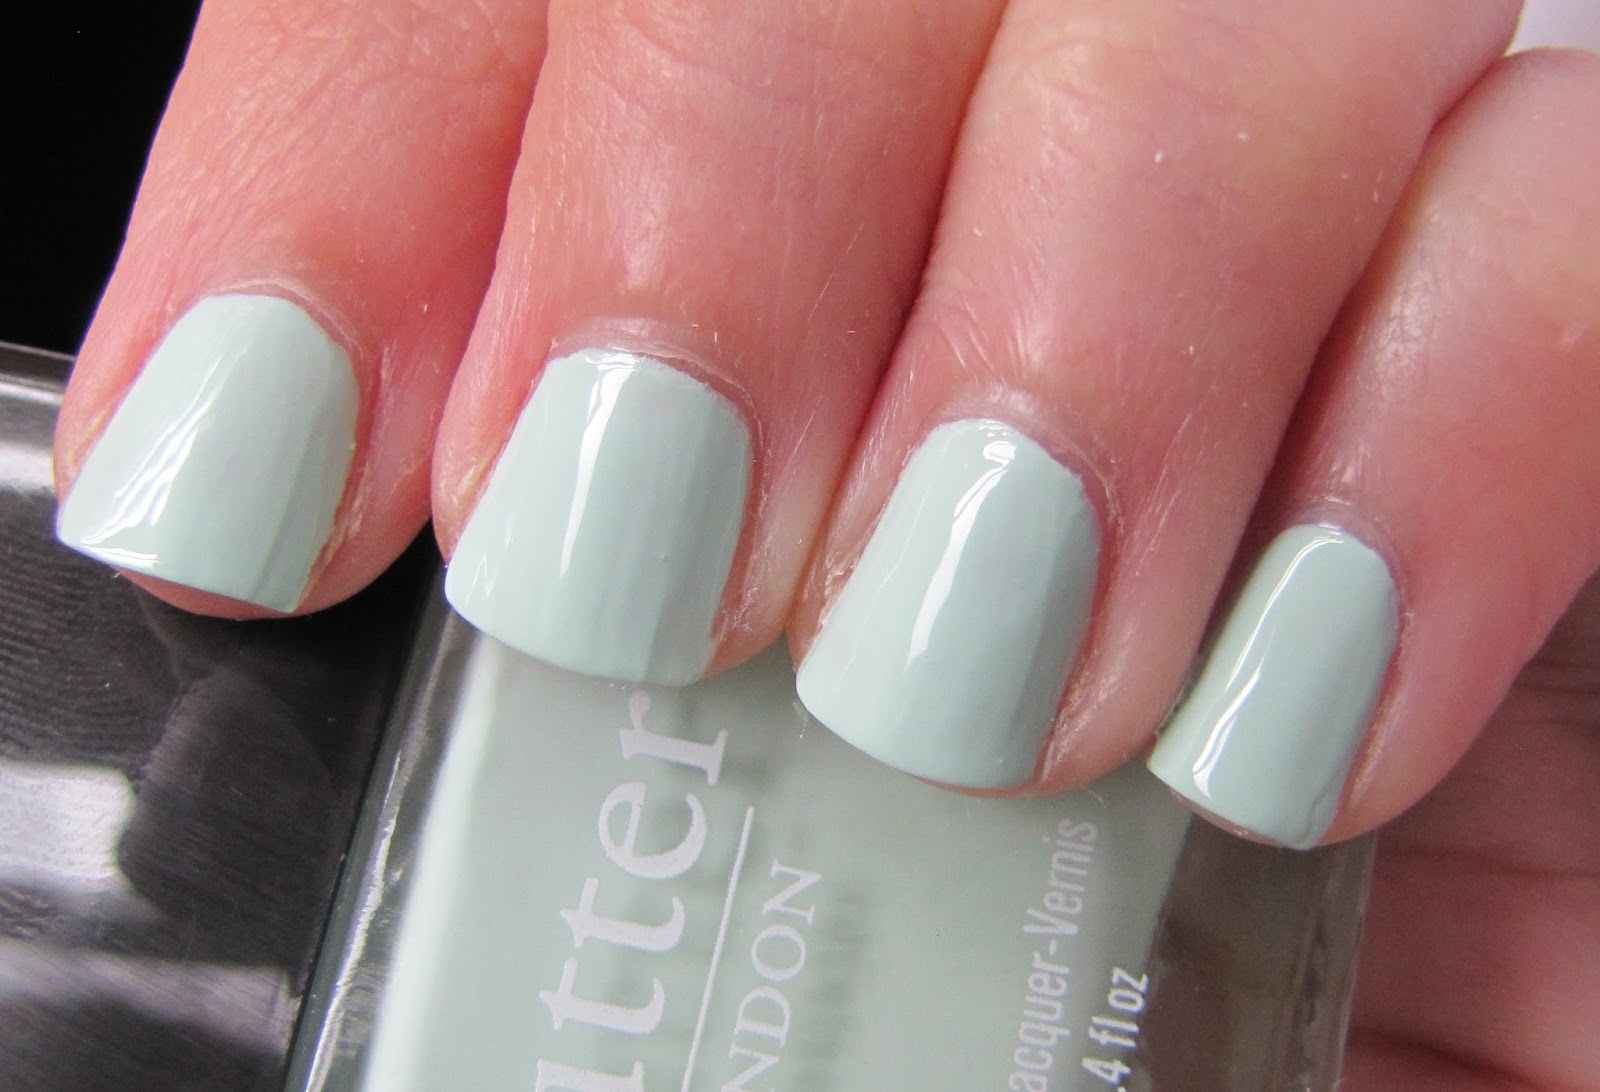 9. Butter London Nail Lacquer in "Fiver" - wide 1